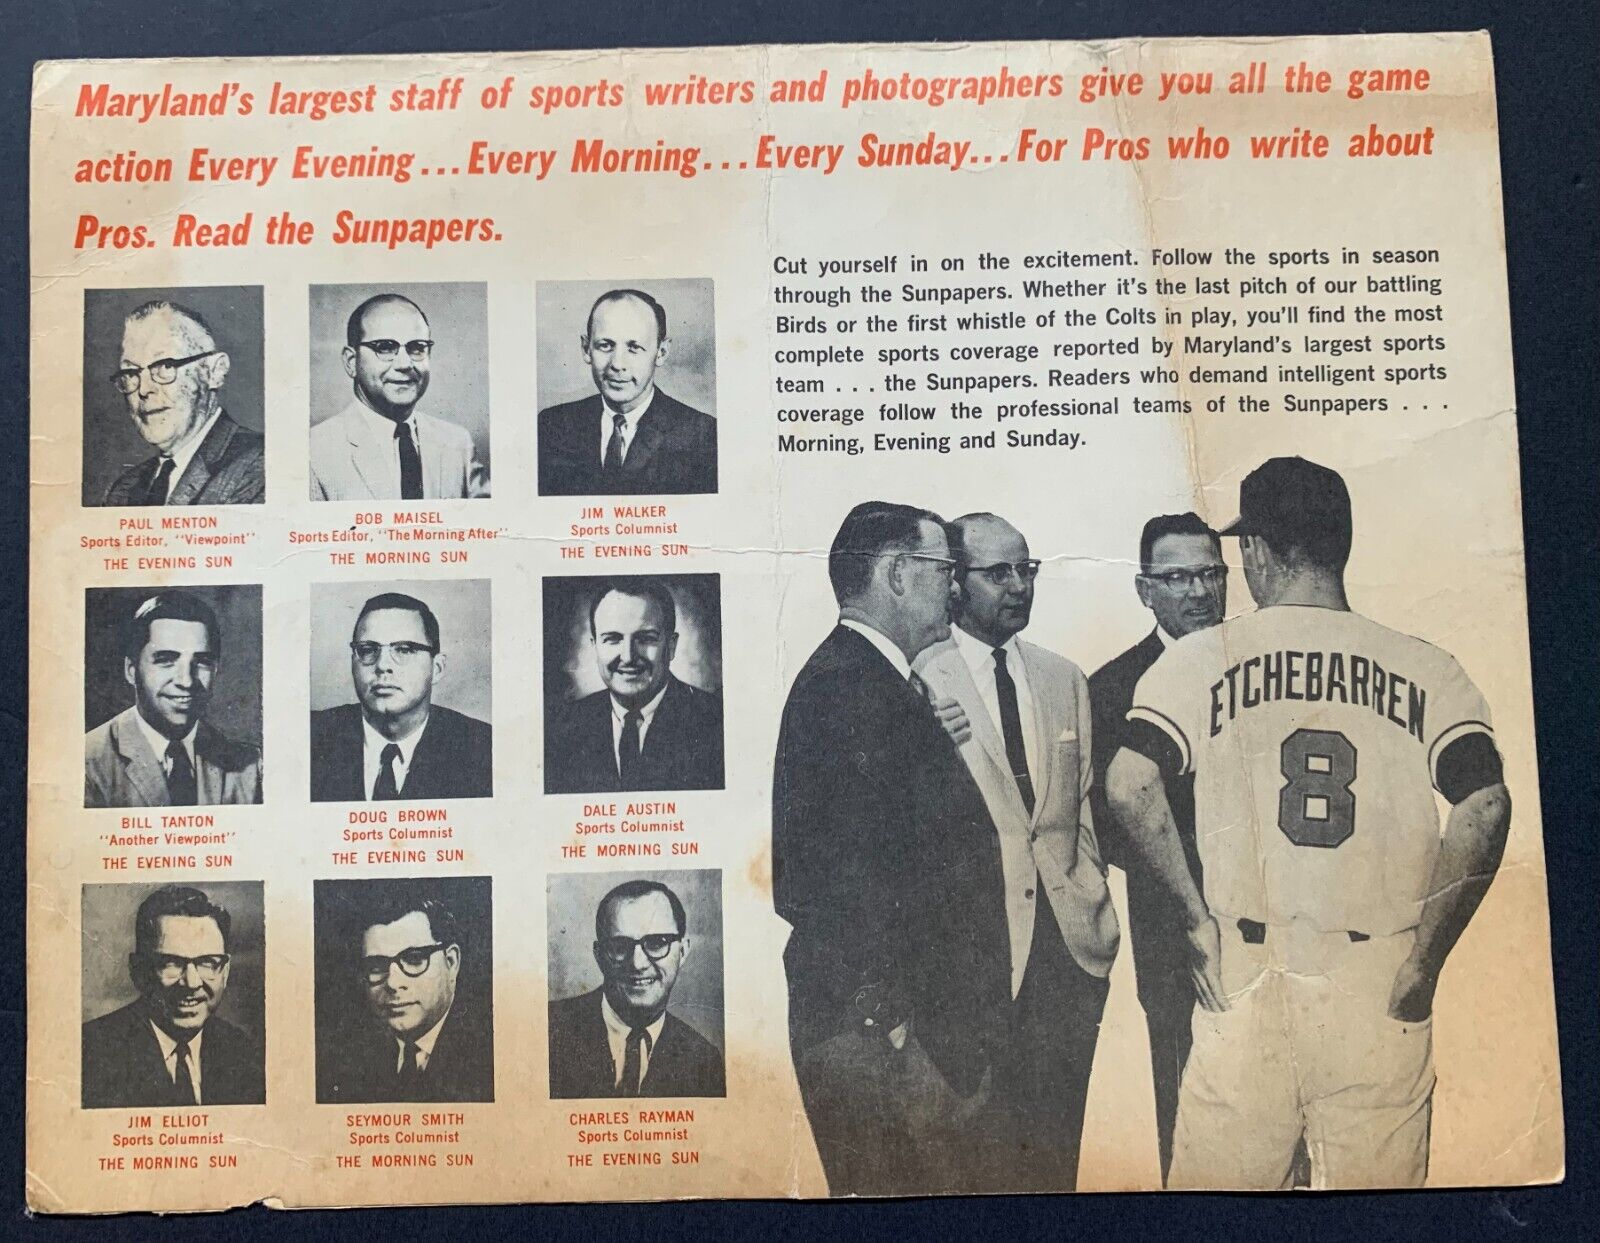 The Glory of the 1966 Orioles and Baltimore